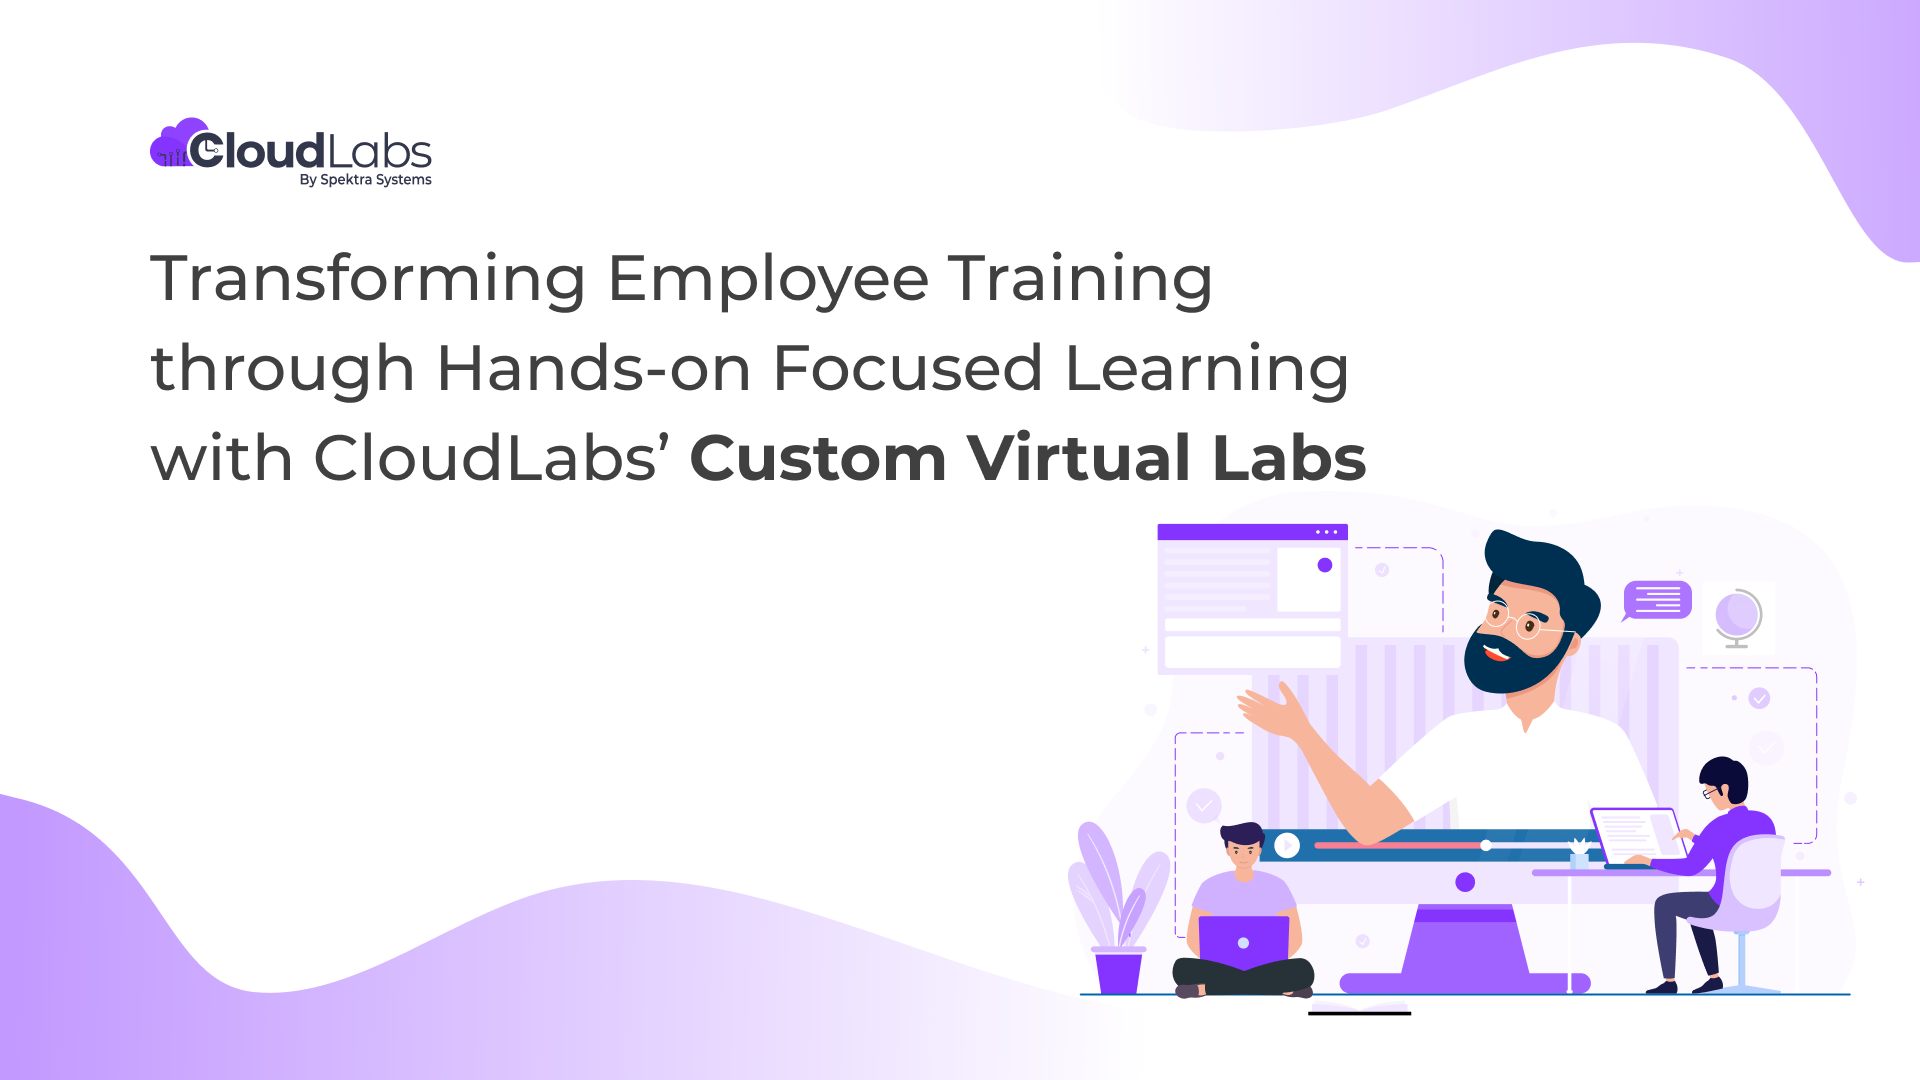 Transforming Employee Training through Hands-on Focused Learning with CloudLabs’ Custom Virtual Labs